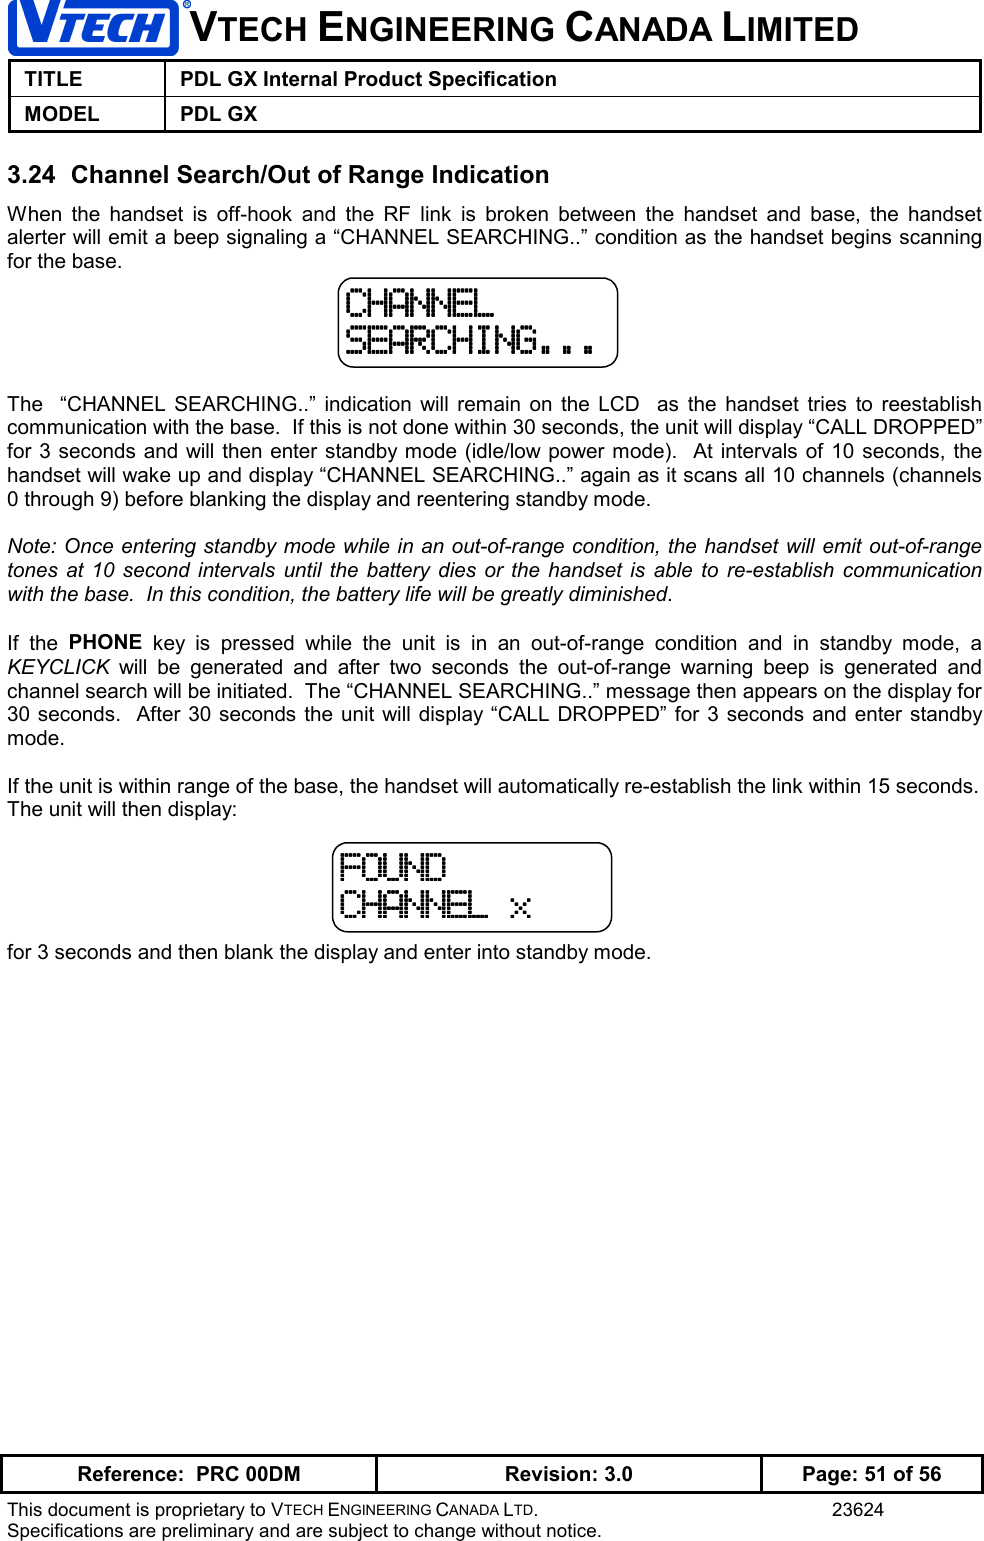 VTECH ENGINEERING CANADA LIMITEDTITLE PDL GX Internal Product SpecificationMODEL PDL GXReference:  PRC 00DM Revision: 3.0 Page: 51 of 56This document is proprietary to VTECH ENGINEERING CANADA LTD. 23624Specifications are preliminary and are subject to change without notice.3.24  Channel Search/Out of Range IndicationWhen the handset is off-hook and the RF link is broken between the handset and base, the handsetalerter will emit a beep signaling a “CHANNEL SEARCHING..” condition as the handset begins scanningfor the base.The  “CHANNEL SEARCHING..” indication will remain on the LCD  as the handset tries to reestablishcommunication with the base.  If this is not done within 30 seconds, the unit will display “CALL DROPPED”for 3 seconds and will then enter standby mode (idle/low power mode).  At intervals of 10 seconds, thehandset will wake up and display “CHANNEL SEARCHING..” again as it scans all 10 channels (channels0 through 9) before blanking the display and reentering standby mode.Note: Once entering standby mode while in an out-of-range condition, the handset will emit out-of-rangetones at 10 second intervals until the battery dies or the handset is able to re-establish communicationwith the base.  In this condition, the battery life will be greatly diminished.If the PHONE key is pressed while the unit is in an out-of-range condition and in standby mode, aKEYCLICK will be generated and after two seconds the out-of-range warning beep is generated andchannel search will be initiated.  The “CHANNEL SEARCHING..” message then appears on the display for30 seconds.  After 30 seconds the unit will display “CALL DROPPED” for 3 seconds and enter standbymode.If the unit is within range of the base, the handset will automatically re-establish the link within 15 seconds.The unit will then display:for 3 seconds and then blank the display and enter into standby mode.CHANNELCHANNELCHANNELCHANNELSEARCHING...SEARCHING...SEARCHING...SEARCHING...FOUNDFOUNDFOUNDFOUNDCHANNEL xCHANNEL xCHANNEL xCHANNEL x